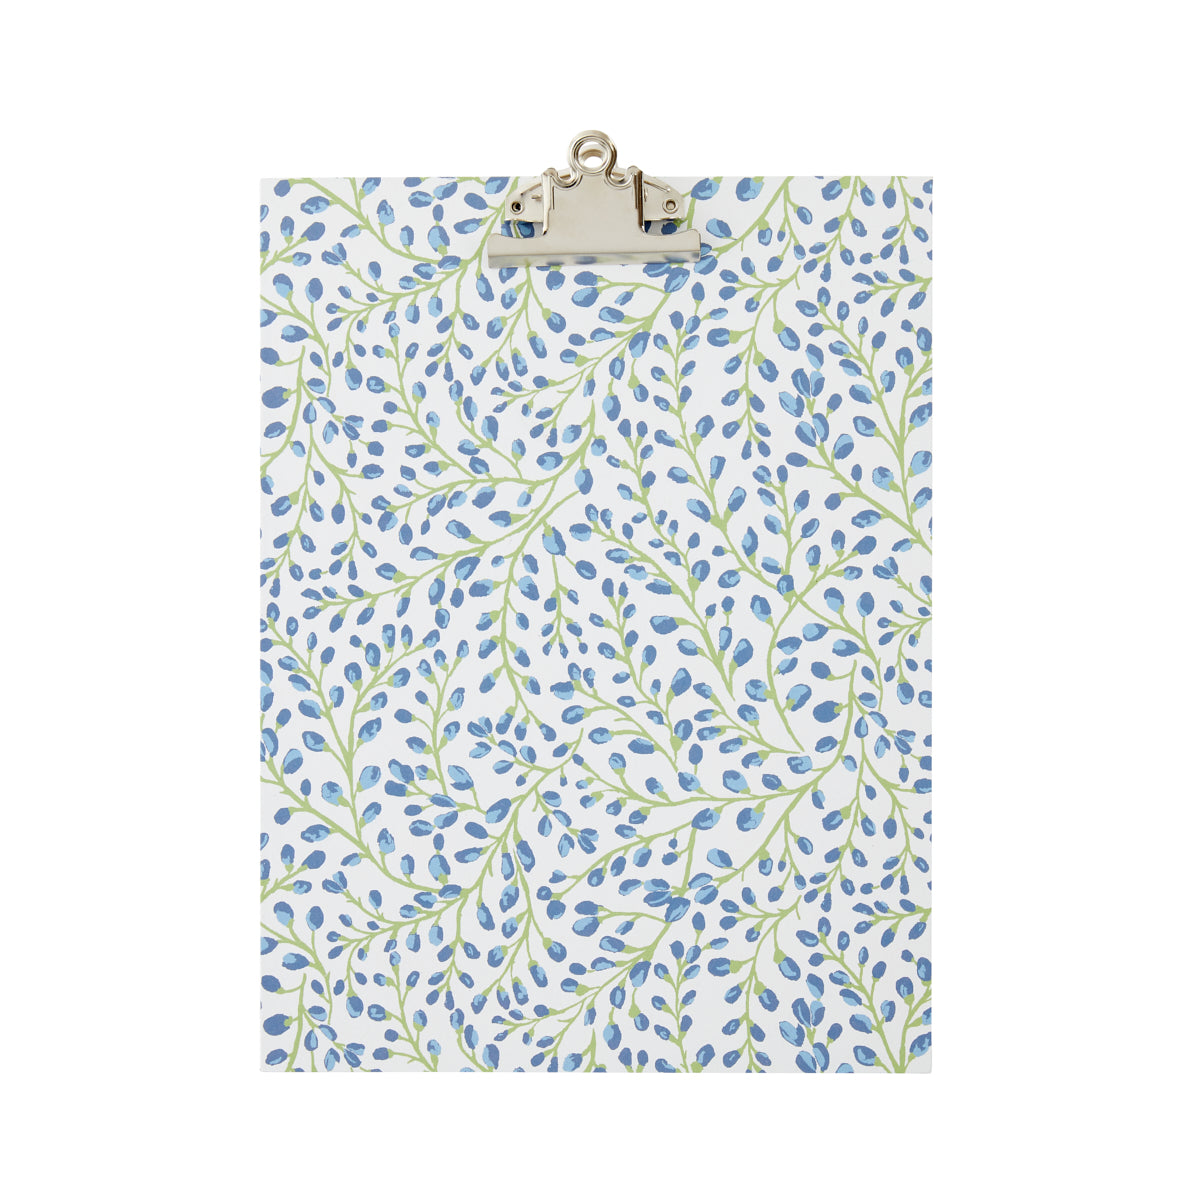 Nina Campbell A4 Clipboard All Over Buds - Blue